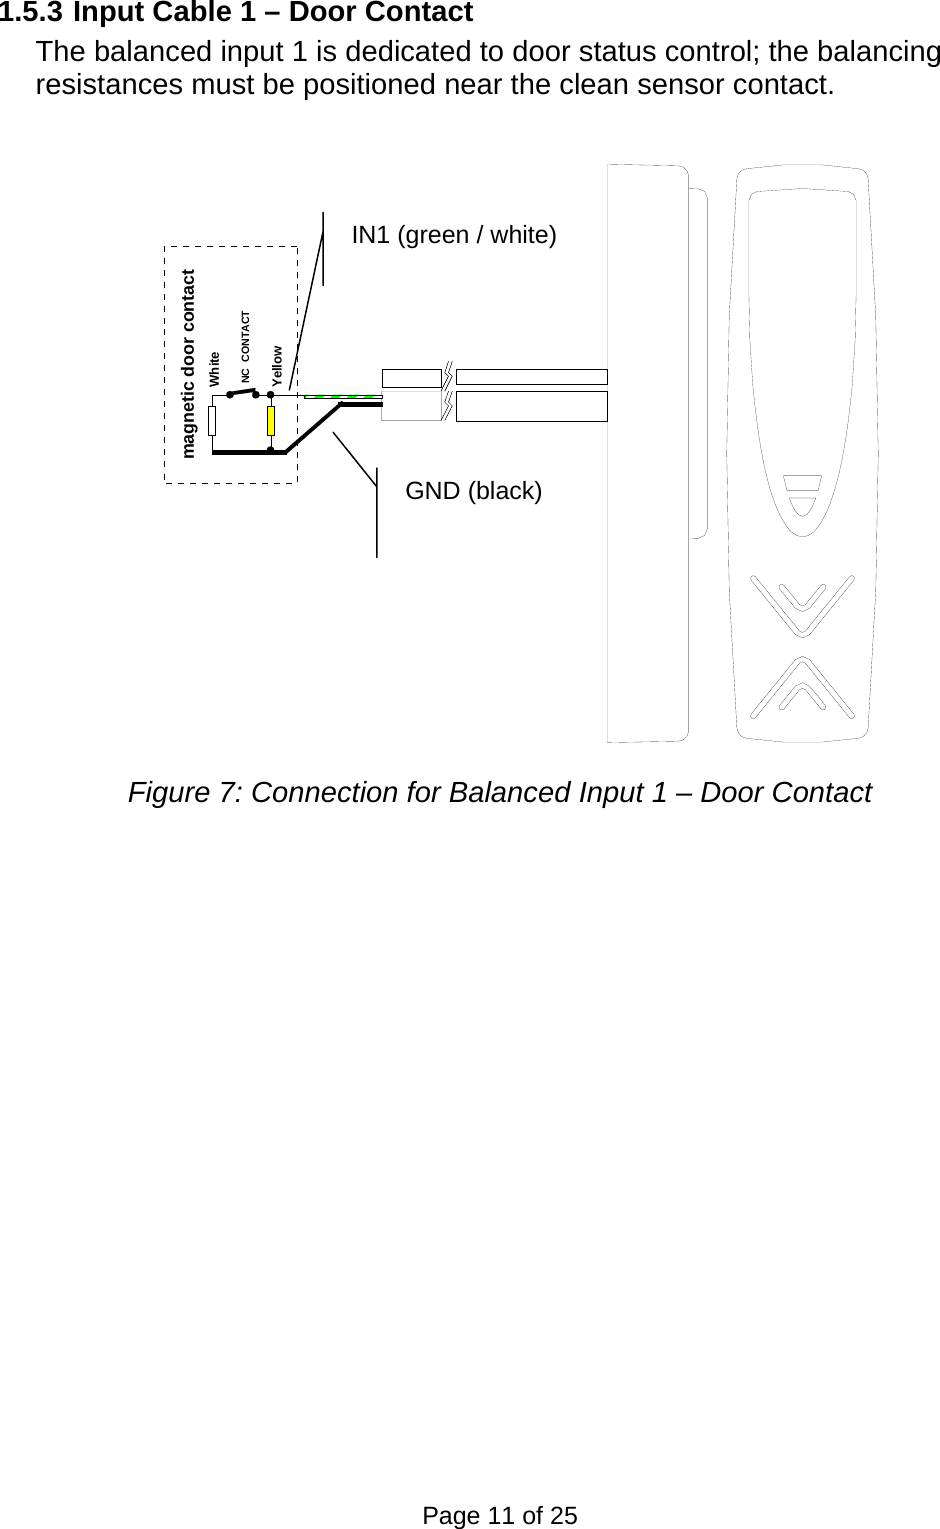 1.5.3 Input Cable 1 – Door Contact The balanced input 1 is dedicated to door status control; the balancing resistances must be positioned near the clean sensor contact. WhiteYellowmagnetic door contactNC  CONTACT Figure 7: Connection for Balanced Input 1 – Door Contact GND (black) IN1 (green / white)    Page 11 of 25 